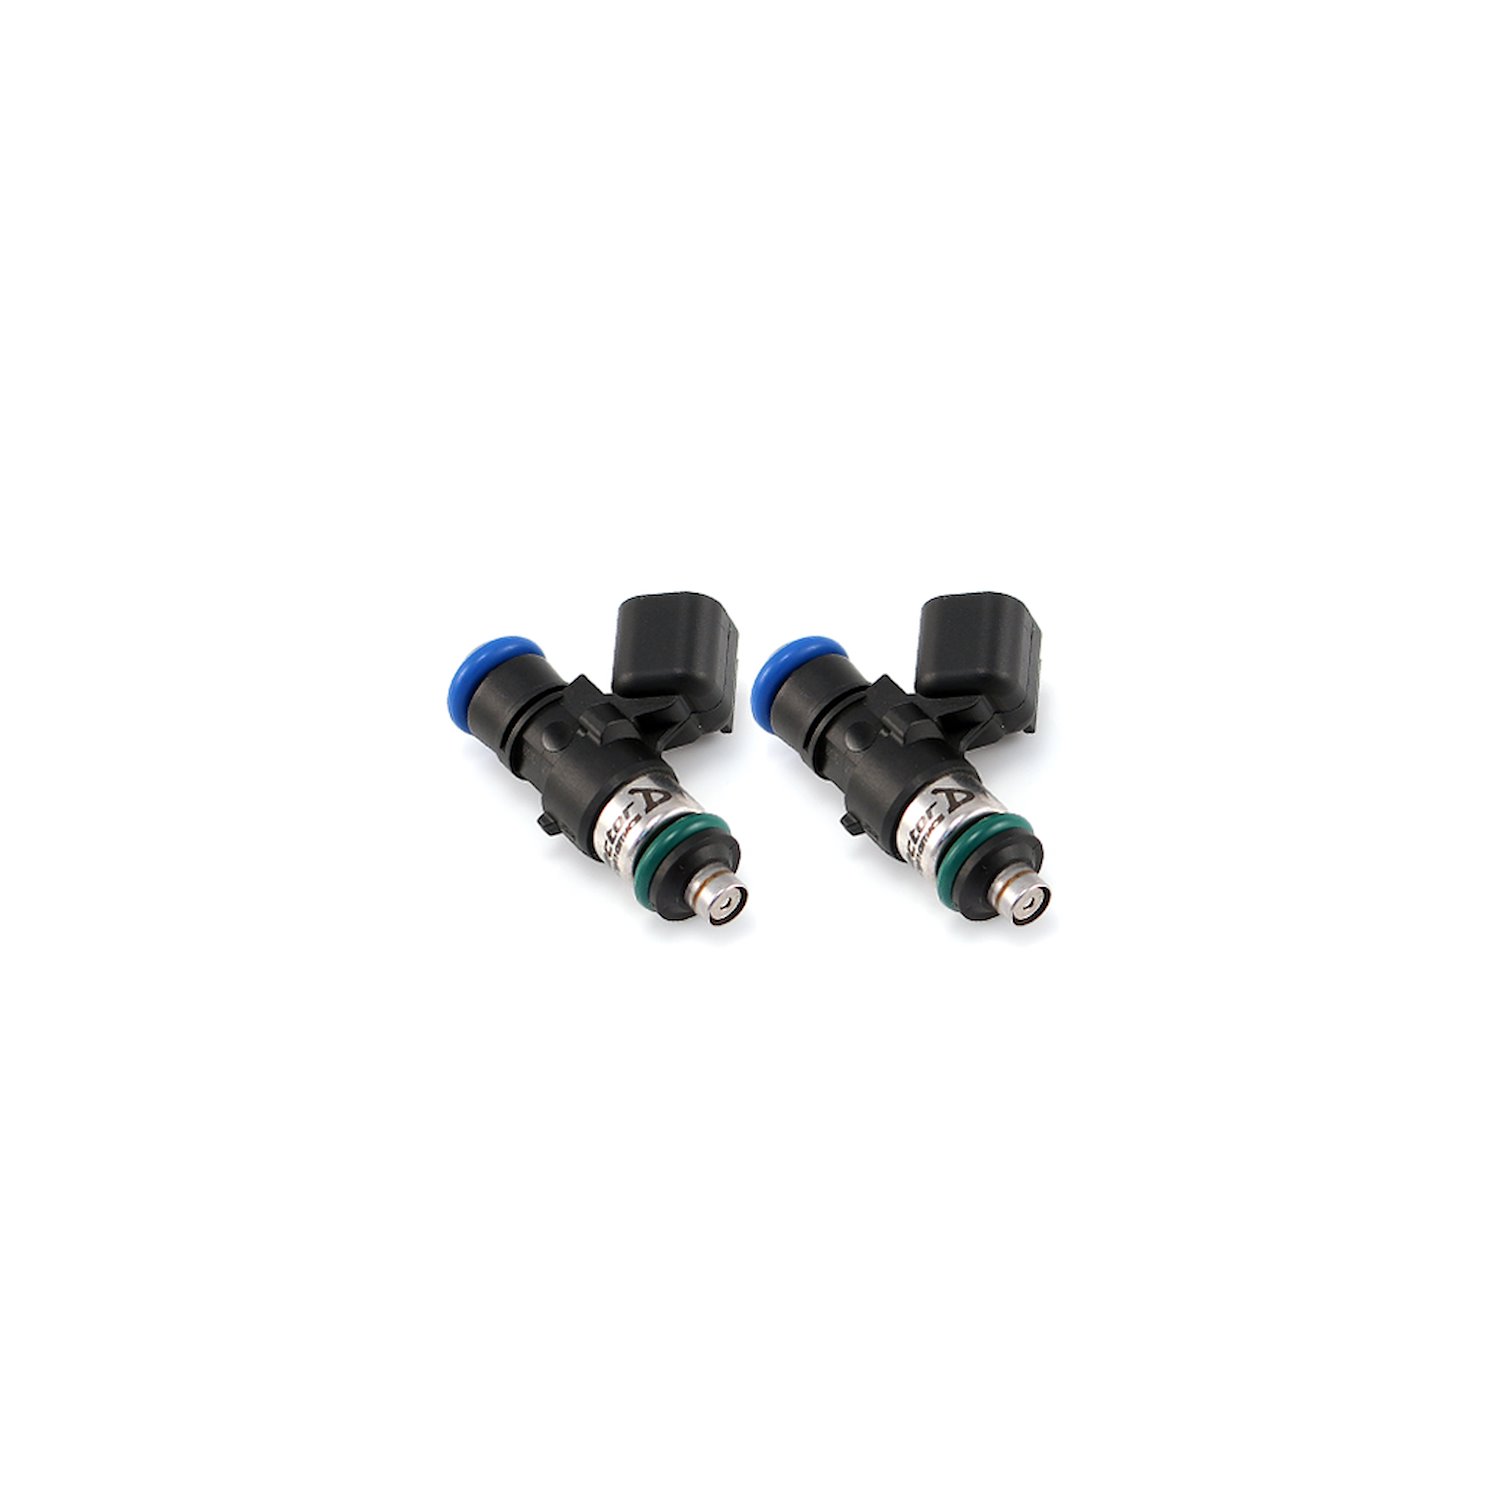 1300.34.14.14.2 1300cc Fuel Injector Set, USCAR Connector, 34 mm Length, 14 mm Top, 14 mm Lower O-Ring